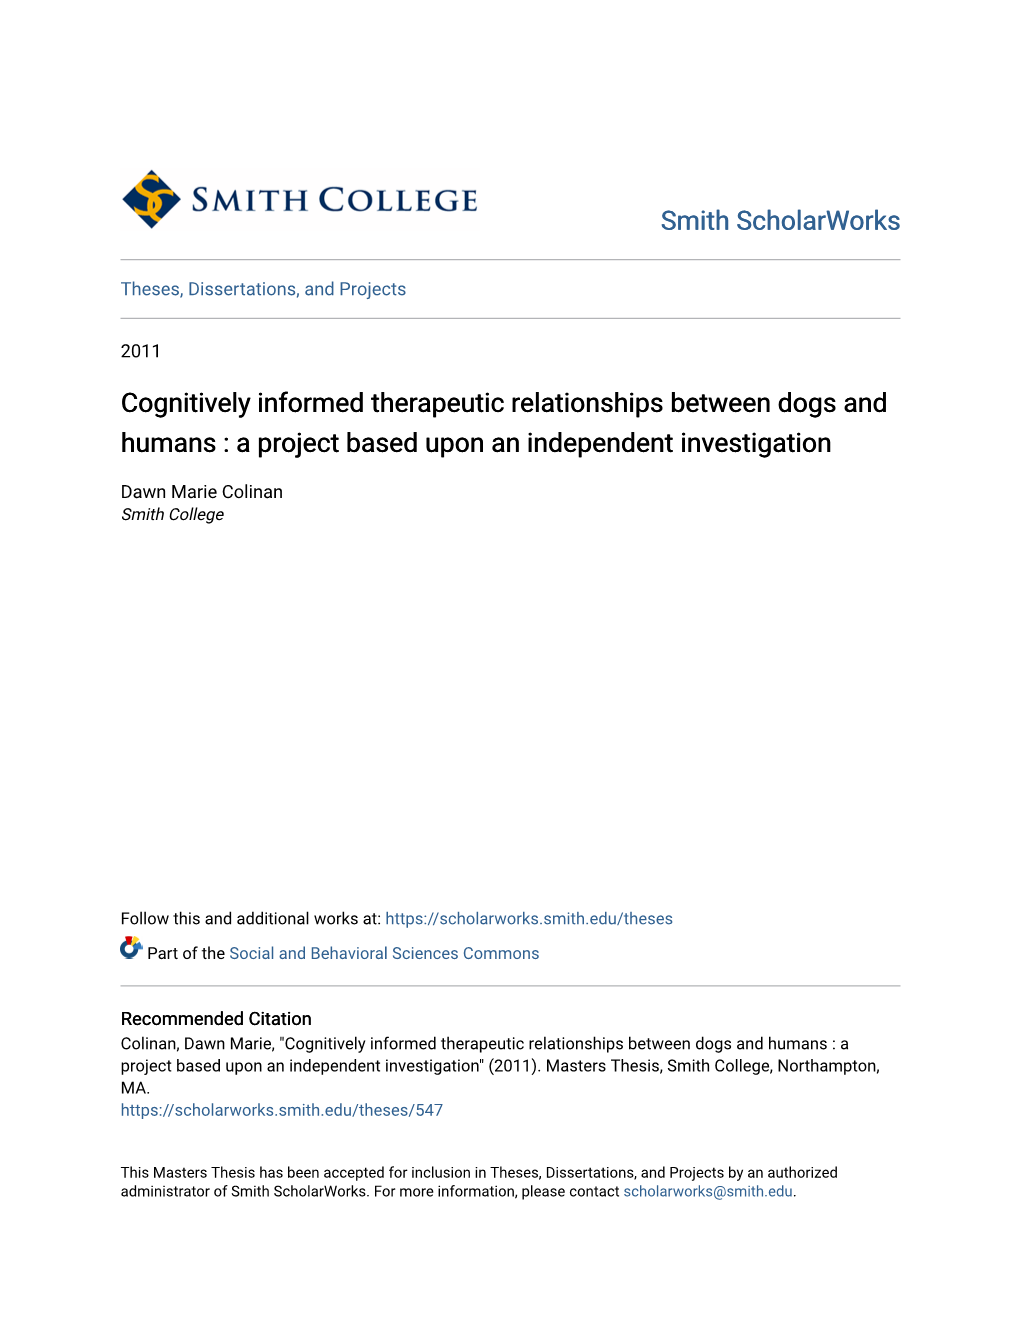 Cognitively Informed Therapeutic Relationships Between Dogs and Humans : a Project Based Upon an Independent Investigation